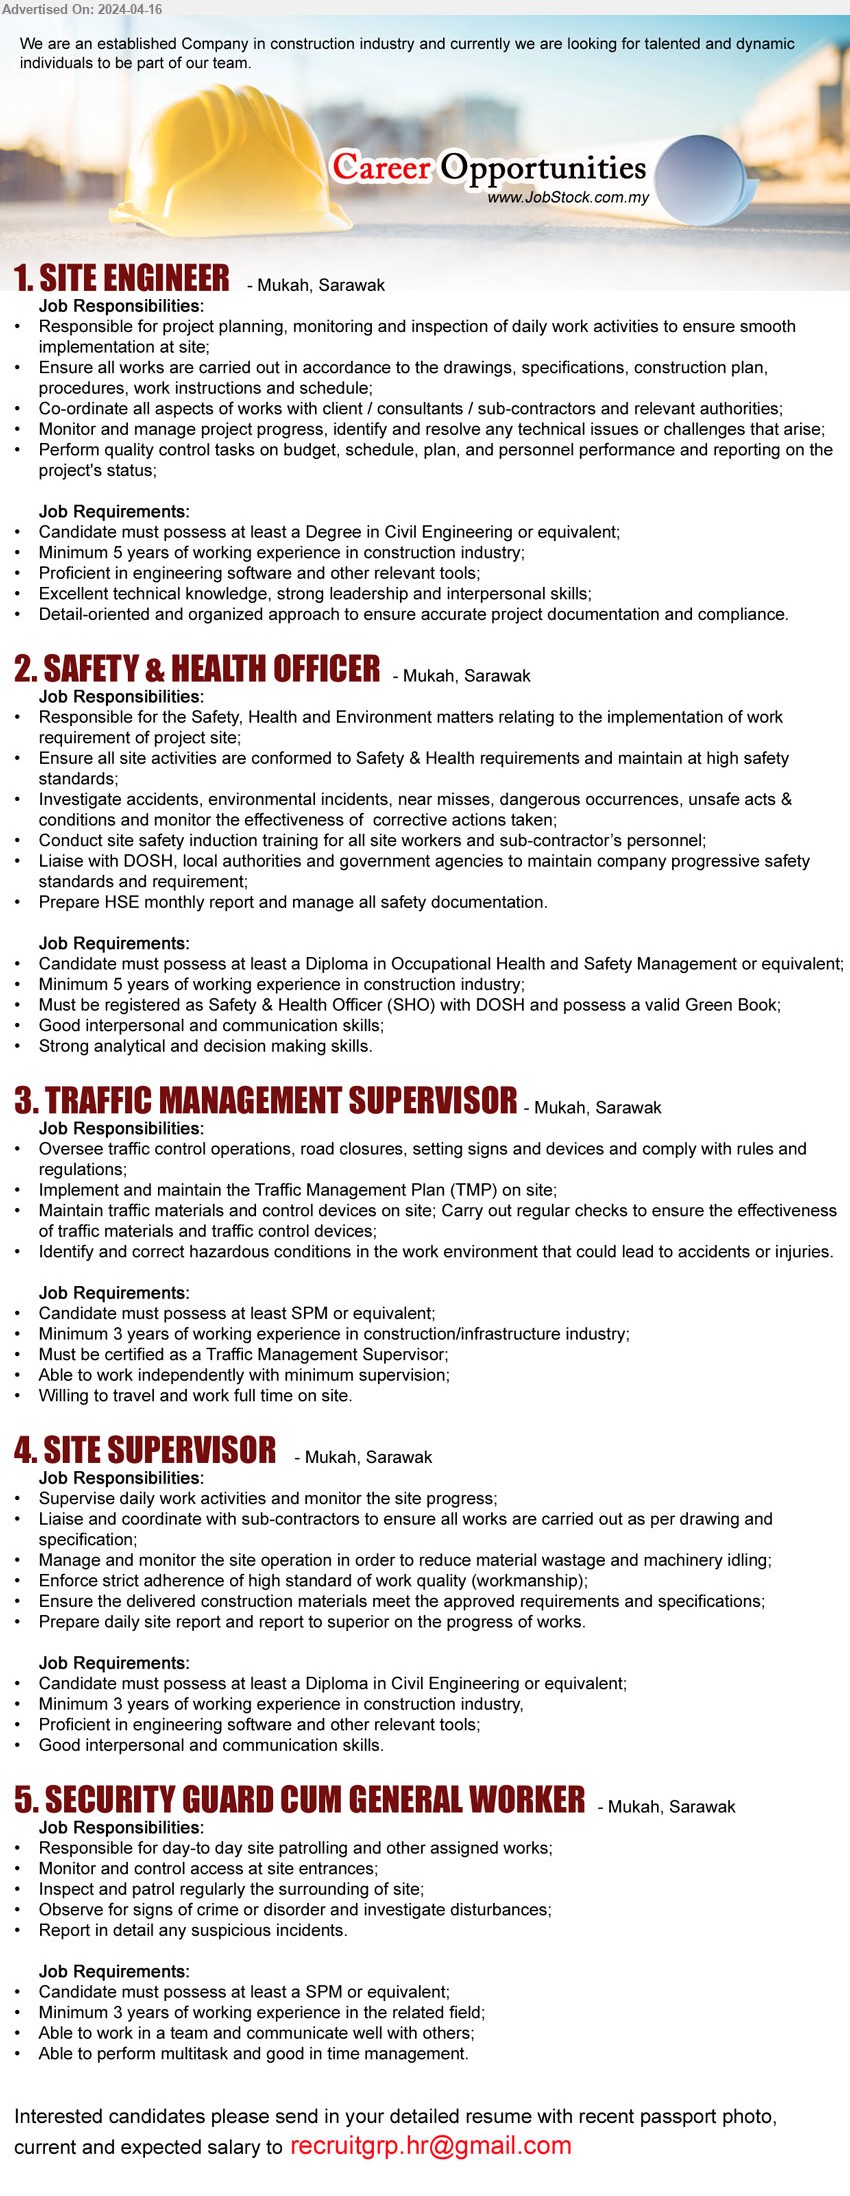 ADVERTISER (Construction Company) - 1. SITE ENGINEER  (Mukah), Degree in Civil Engineering, 5 yrs. exp.,...
2. SAFETY & HEALTH OFFICER (Mukah), Diploma in Occupational Health and Safety Management,...
3. TRAFFIC MANAGEMENT SUPERVISOR (Mukah), SPM, 3 yrs. exp.  in construction/infrastructure industry;,...
4. SITE SUPERVISOR (Mukah),  Diploma in Civil Engineering, 3 yrs. exp.,...
5. SECURITY GUARD CUM GENERAL WORKER (Mukah), SPM, 3 yrs. exp.,...
Email resume to ...